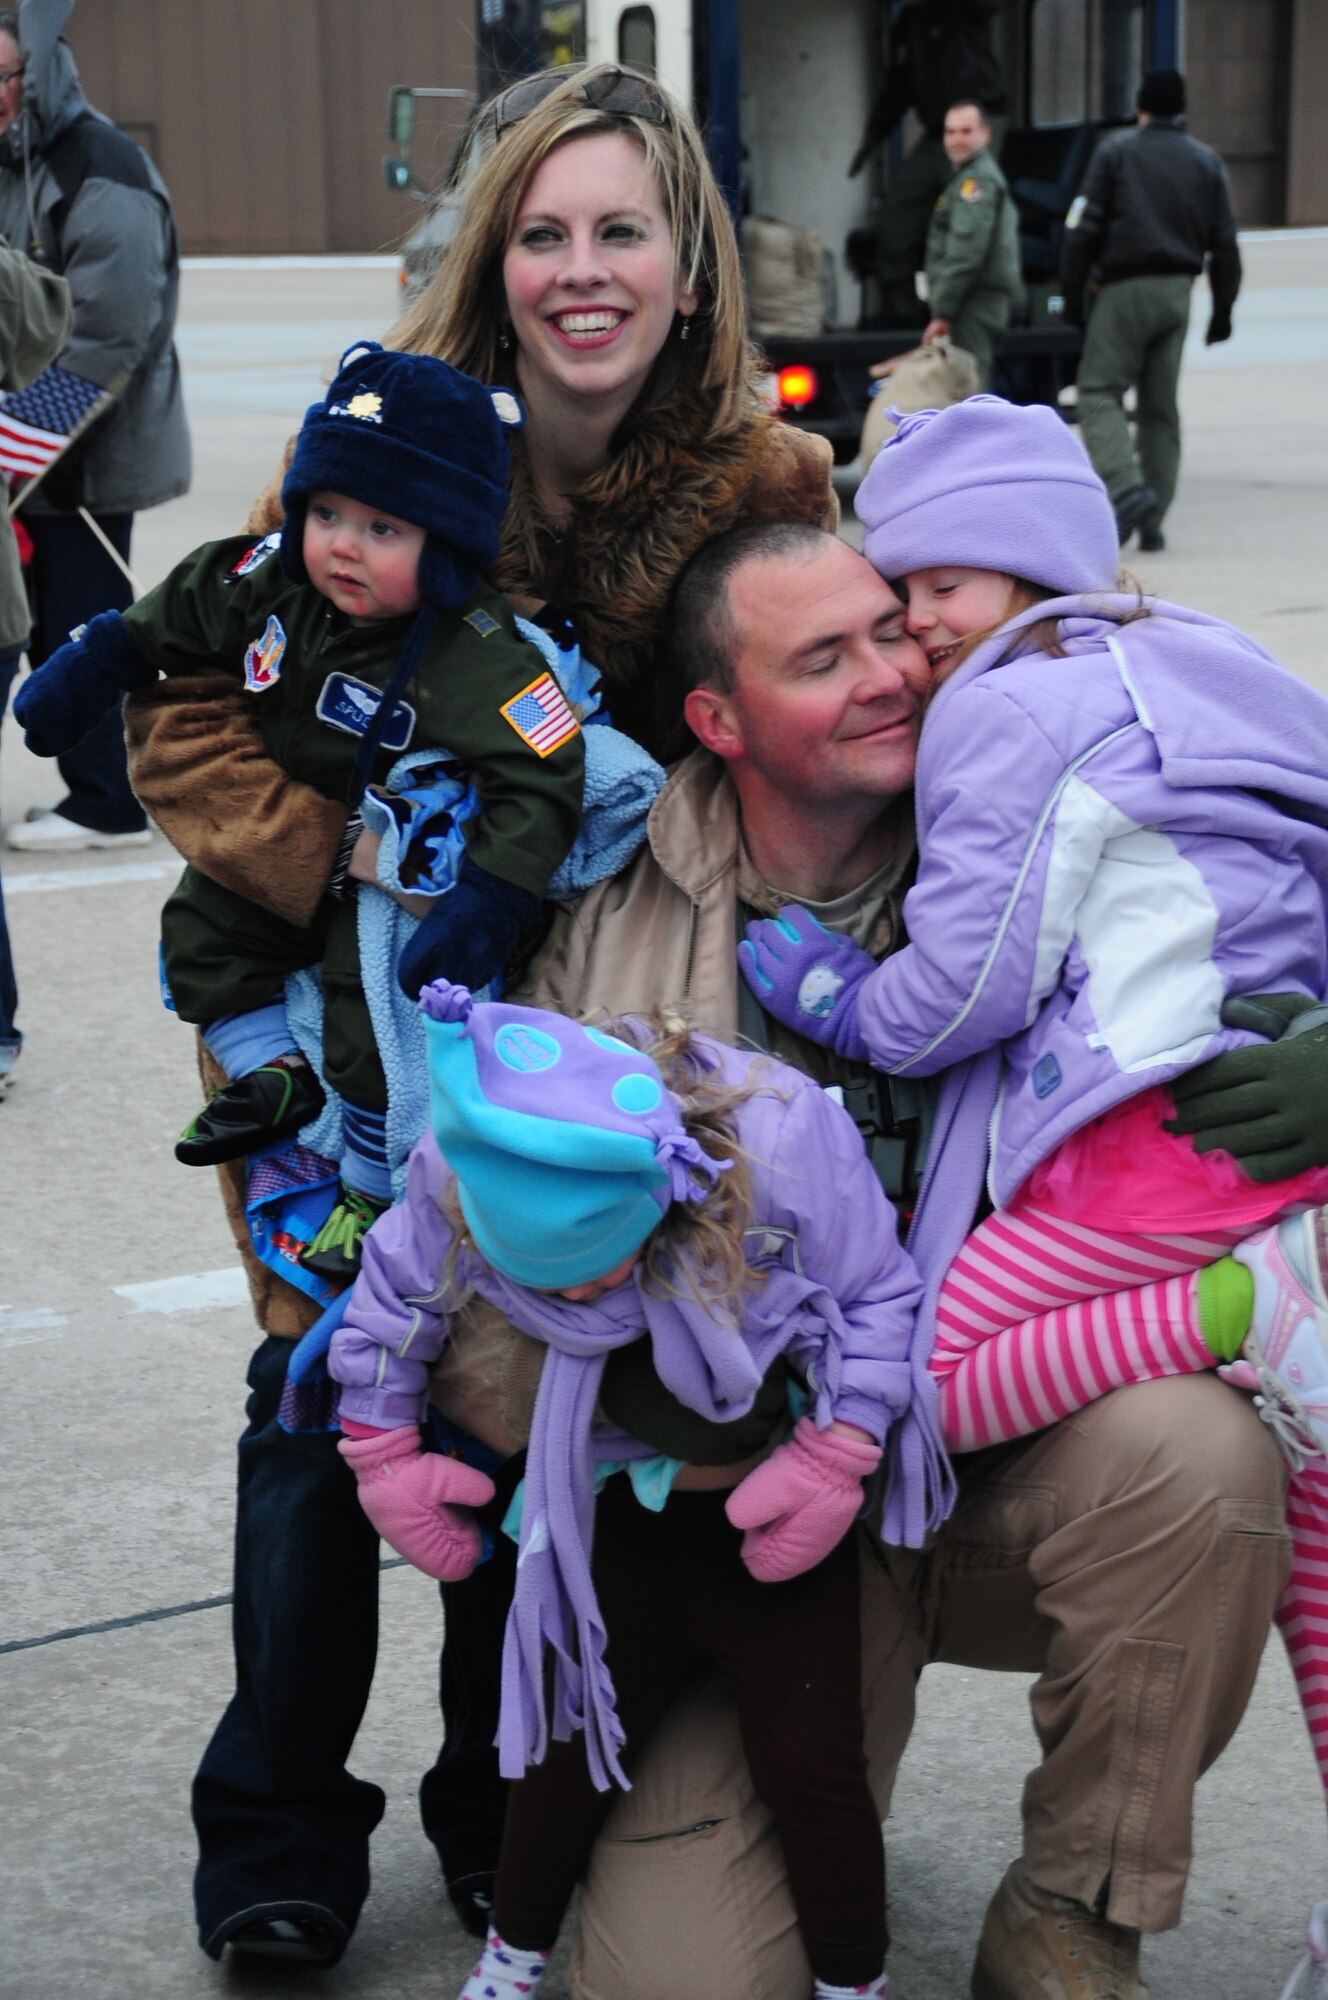 ELLSWORTH AIR FORCE BASE, S.D. -- Maj. Andy Kowalchuk, 37th Bomb Squadron B-1B Lancer pilot, reunites with his wife, son and two daughters after a deployment in Southwest Asia.  Maj. Kowalchuk returned from his deployment in support of Operation Iraqi Freedom and Operation Enduring Freedom. (U.S. Air Force photo/Airman 1st Class Anthony Sanchelli)


